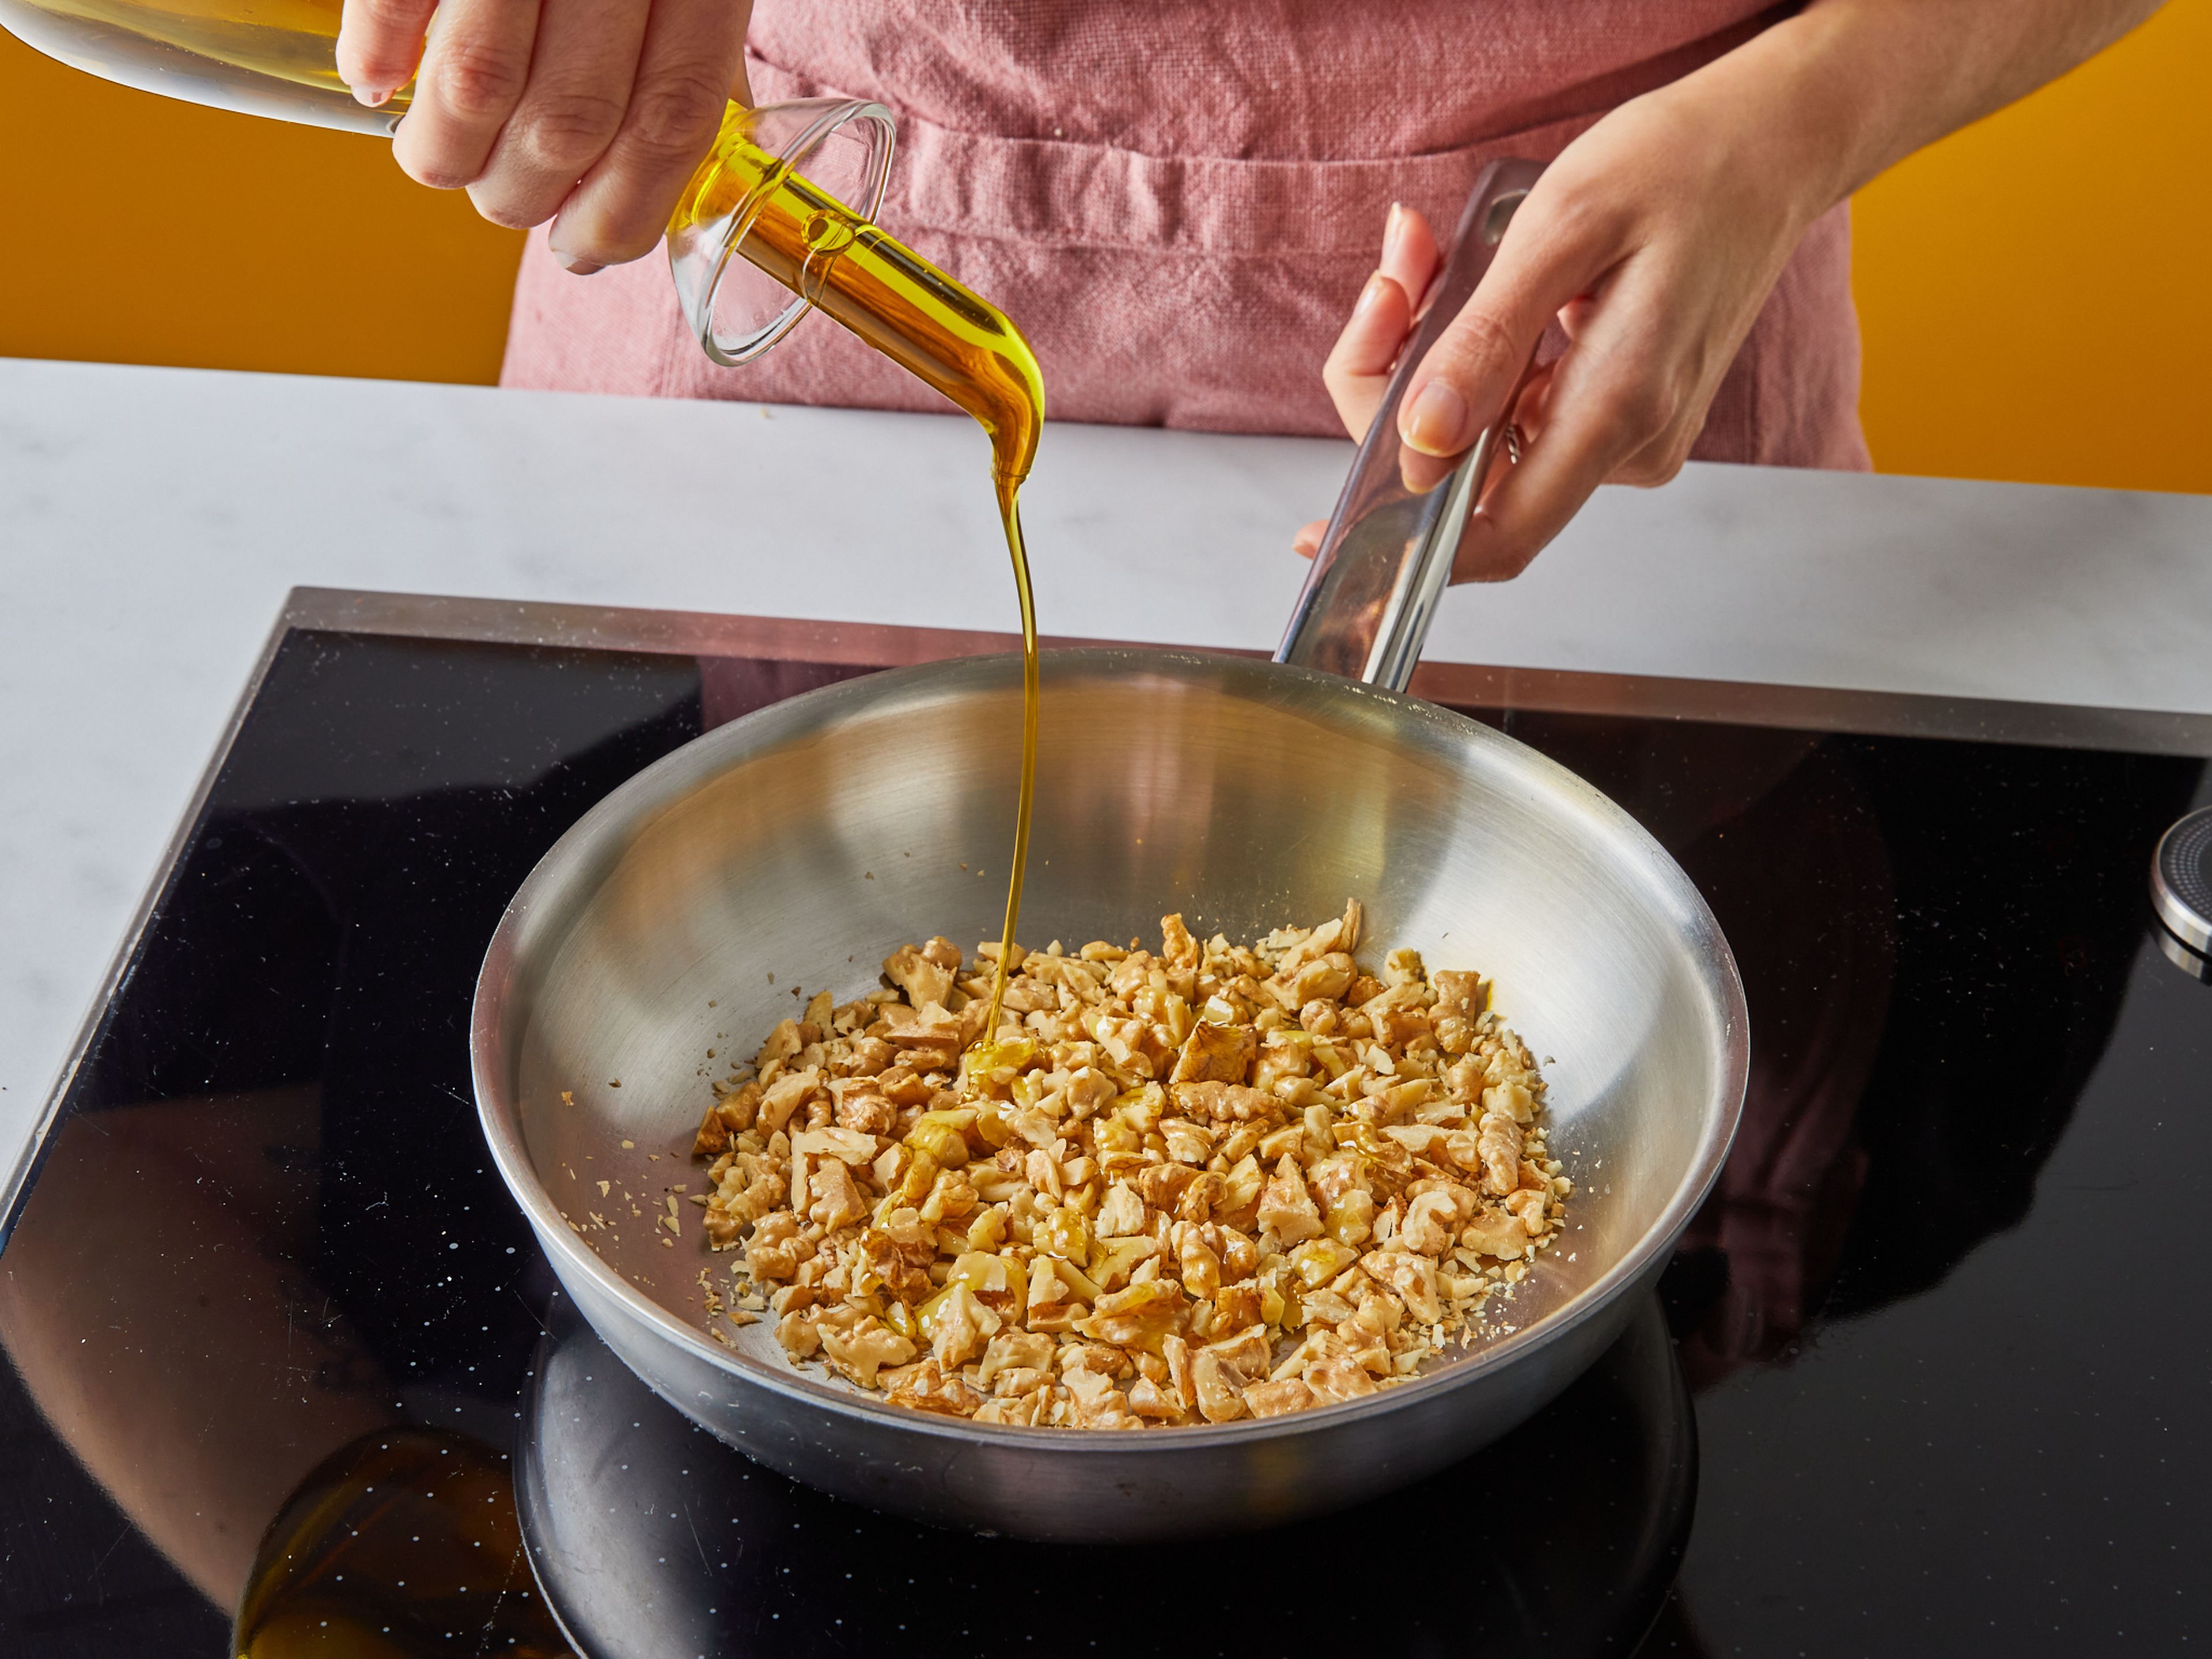 Transfer walnuts to a small, dry frying pan over medium heat. Toss with a little bit of olive oil and toast, stirring often, until golden brown and fragrant, approx. 8 min. Remove and set aside. Wipe out the pan and return to medium heat.